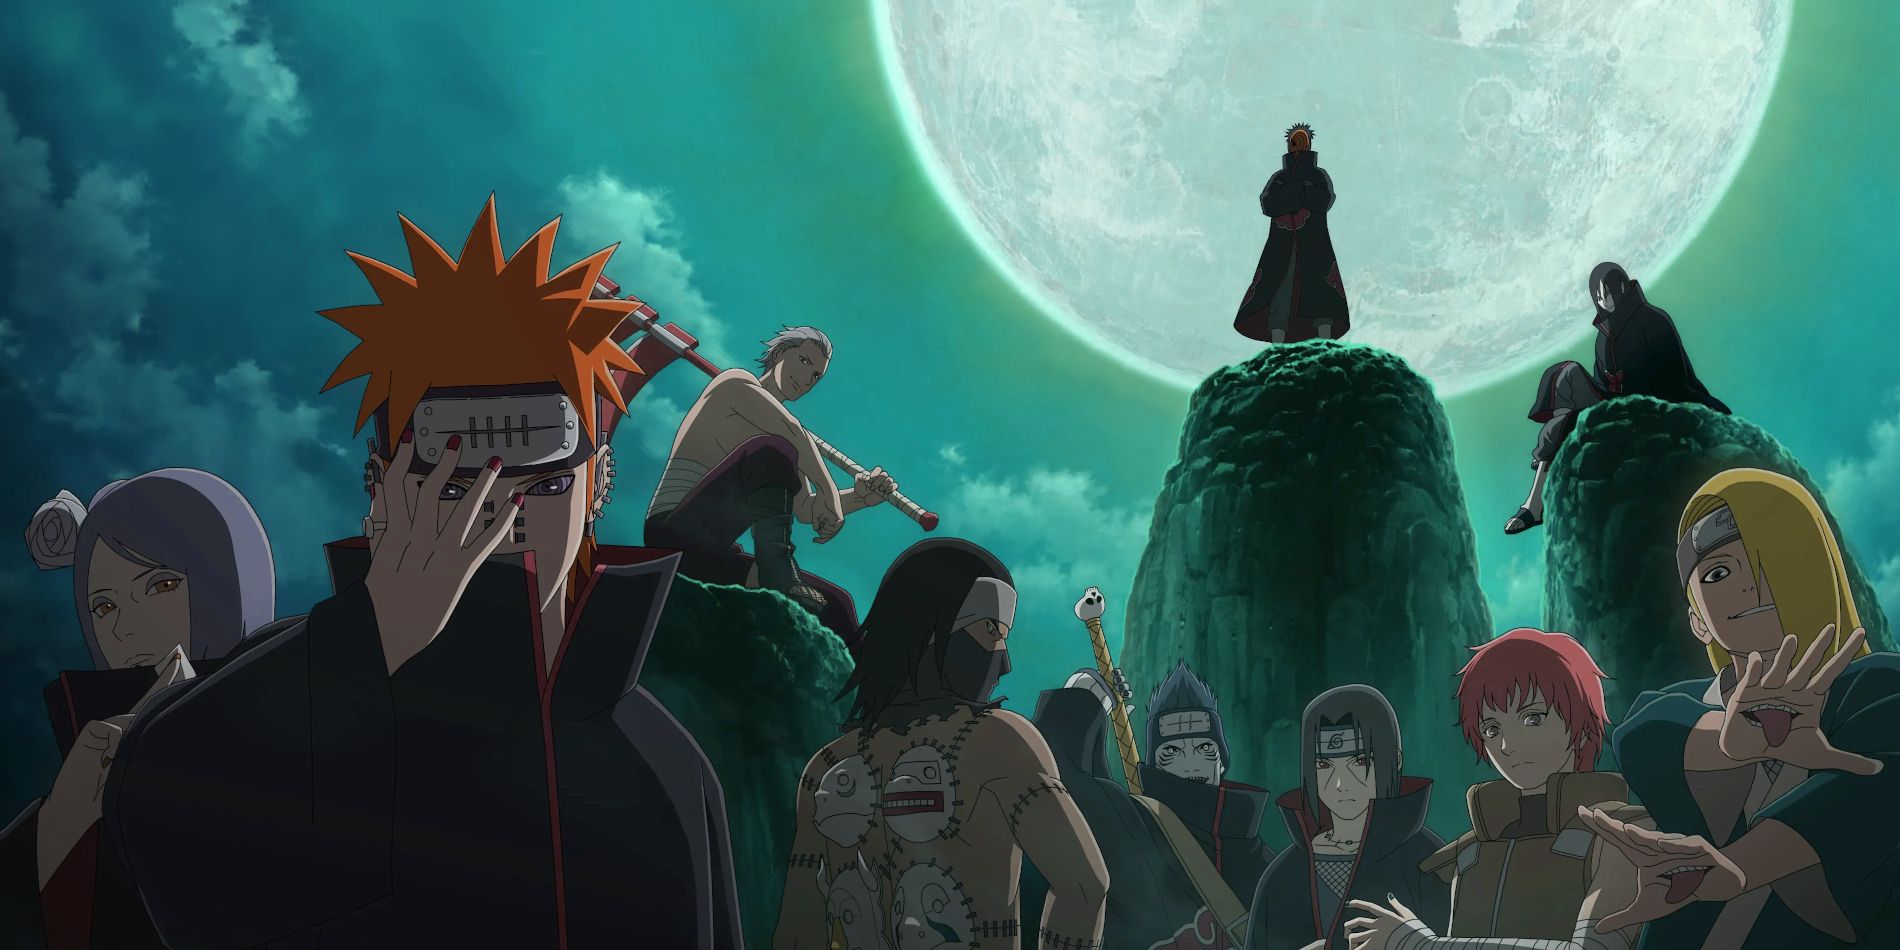 Image of Naruto Shippuden's Akatsuki group standing together under a full moon. Each wearing outfits they wore before officially joining the group.